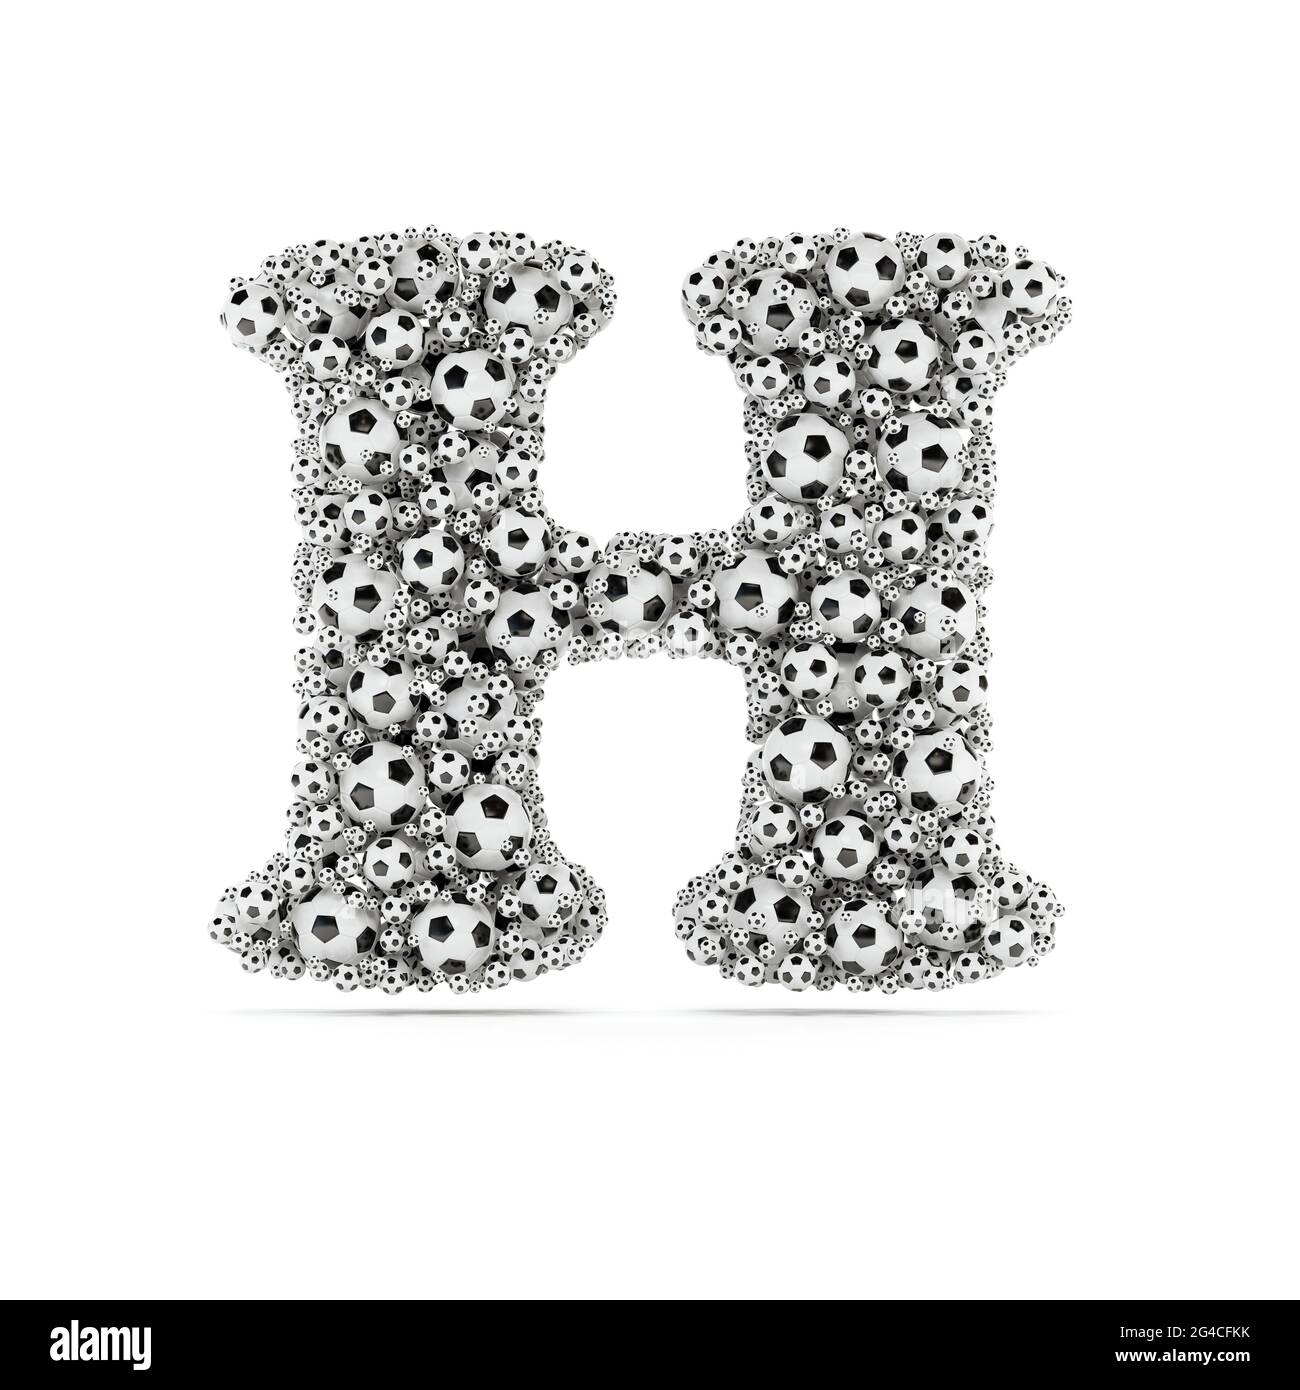 H letter with soccer football balls. Realistic 3d rendering illustration. Isolated on white background with shadow cast Stock Photo